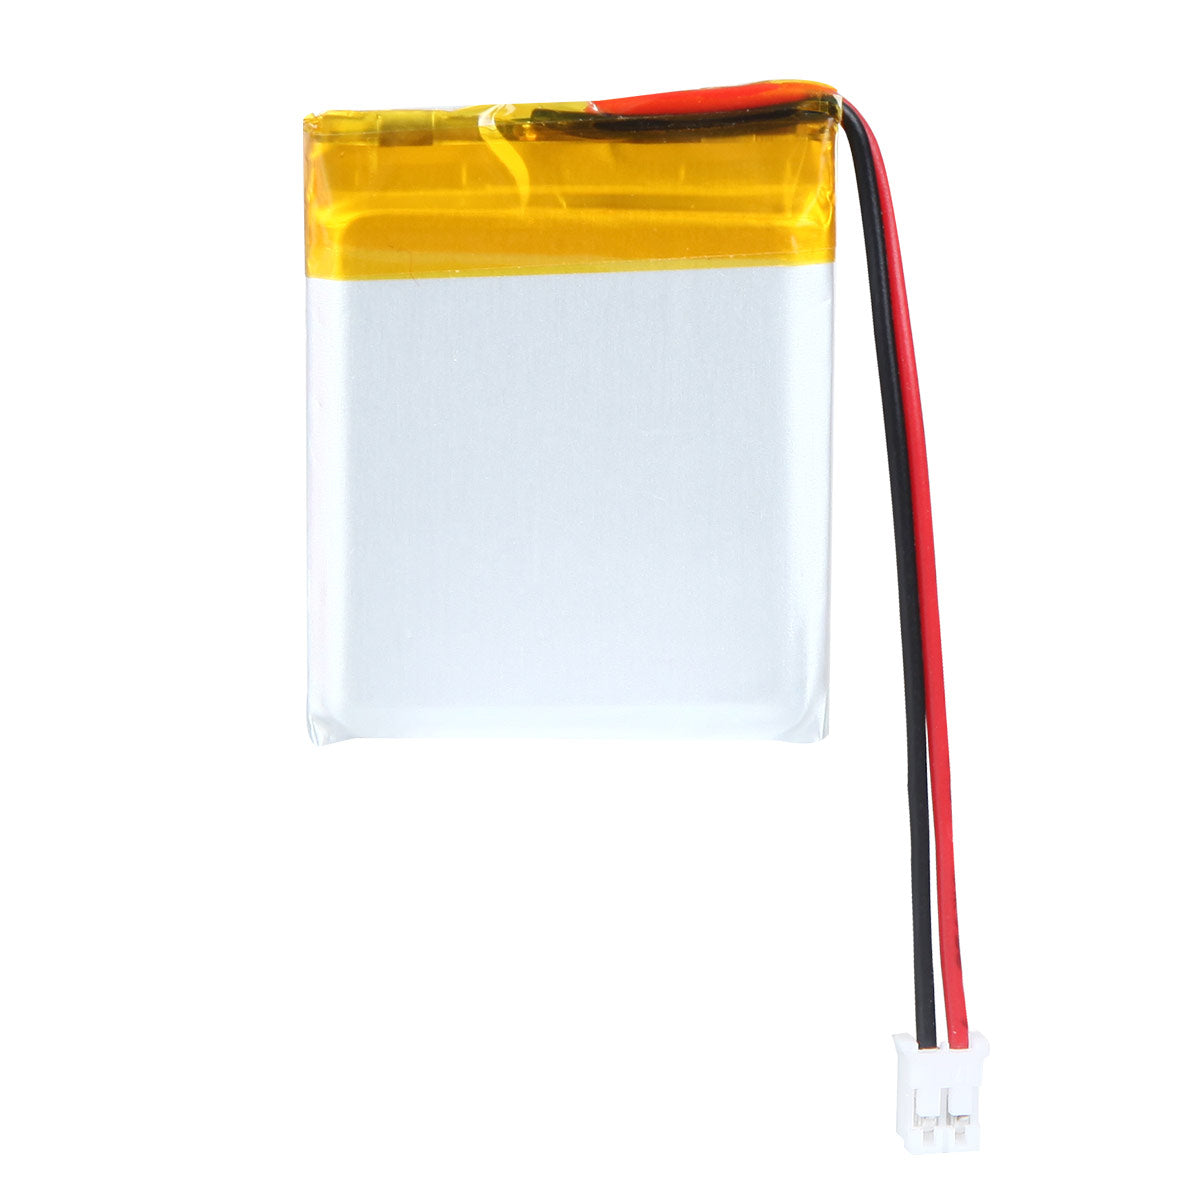 YDL 3.7V 500mAh 503035 Rechargeable Lithium Polymer Battery Length 37mm